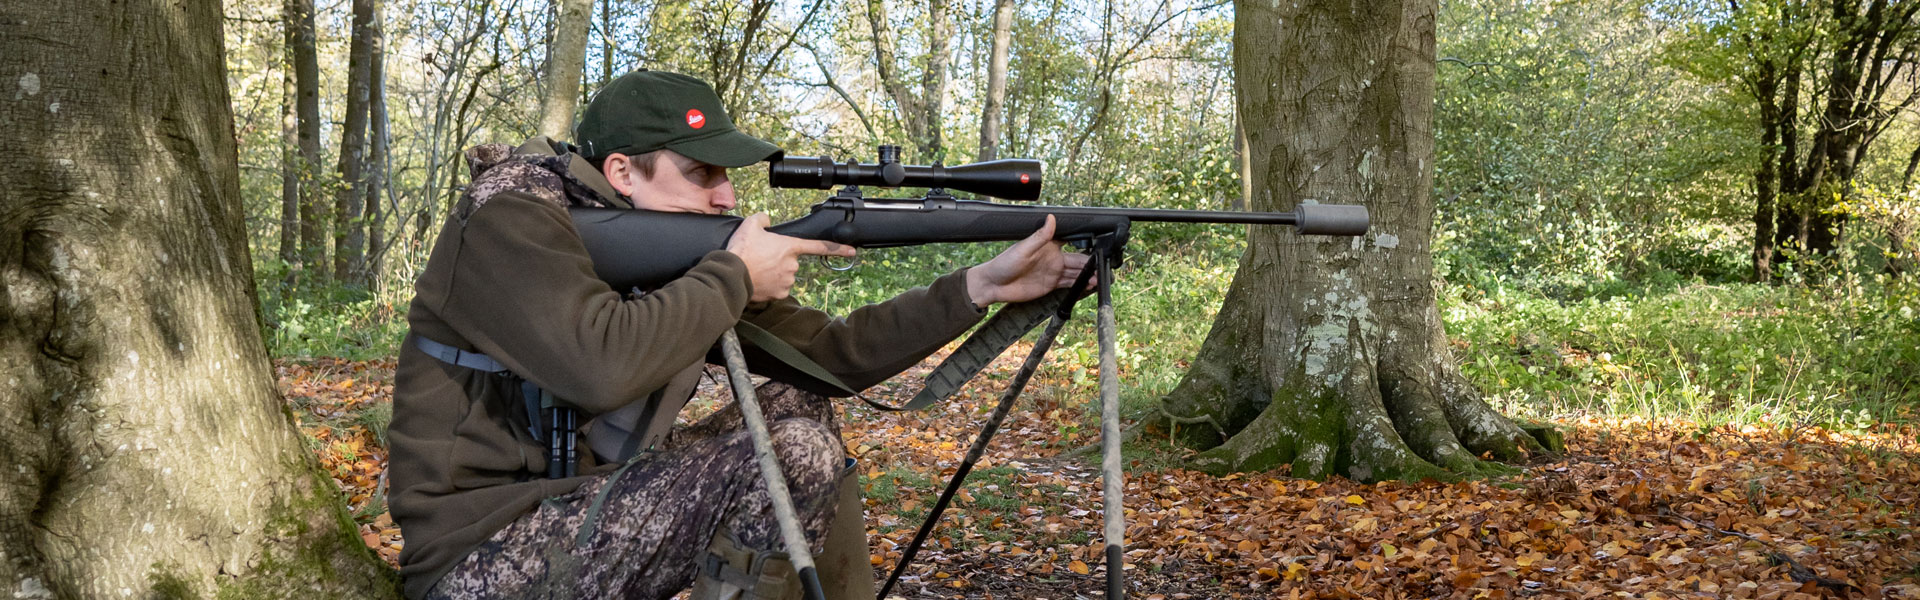 A deer stalker aiming down their rifle scope